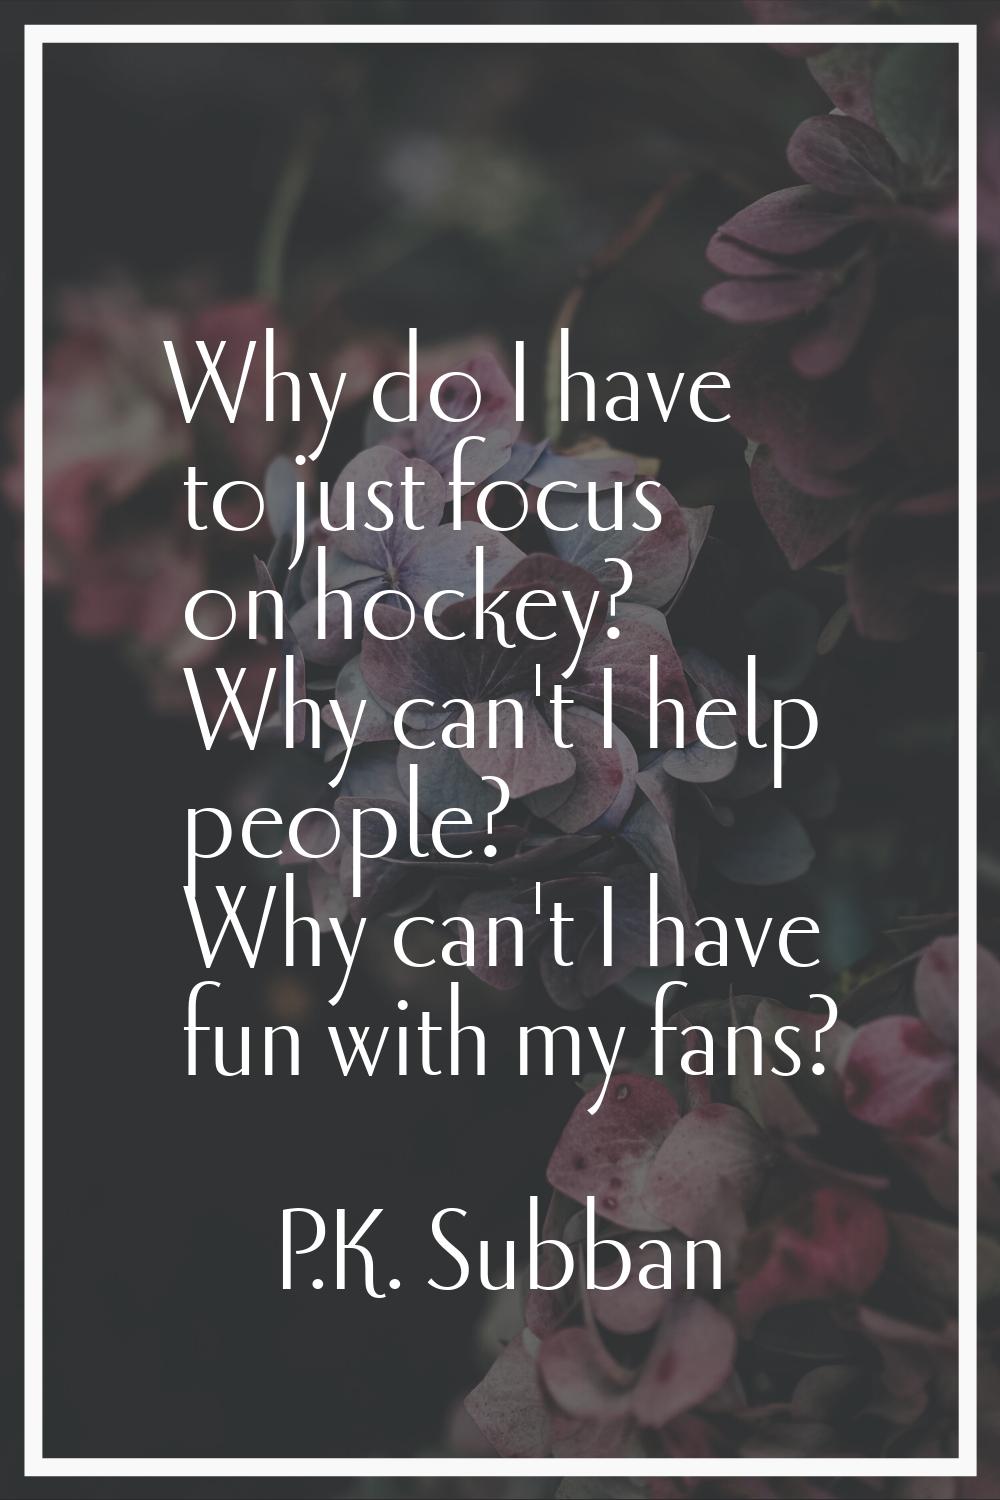 Why do I have to just focus on hockey? Why can't I help people? Why can't I have fun with my fans?